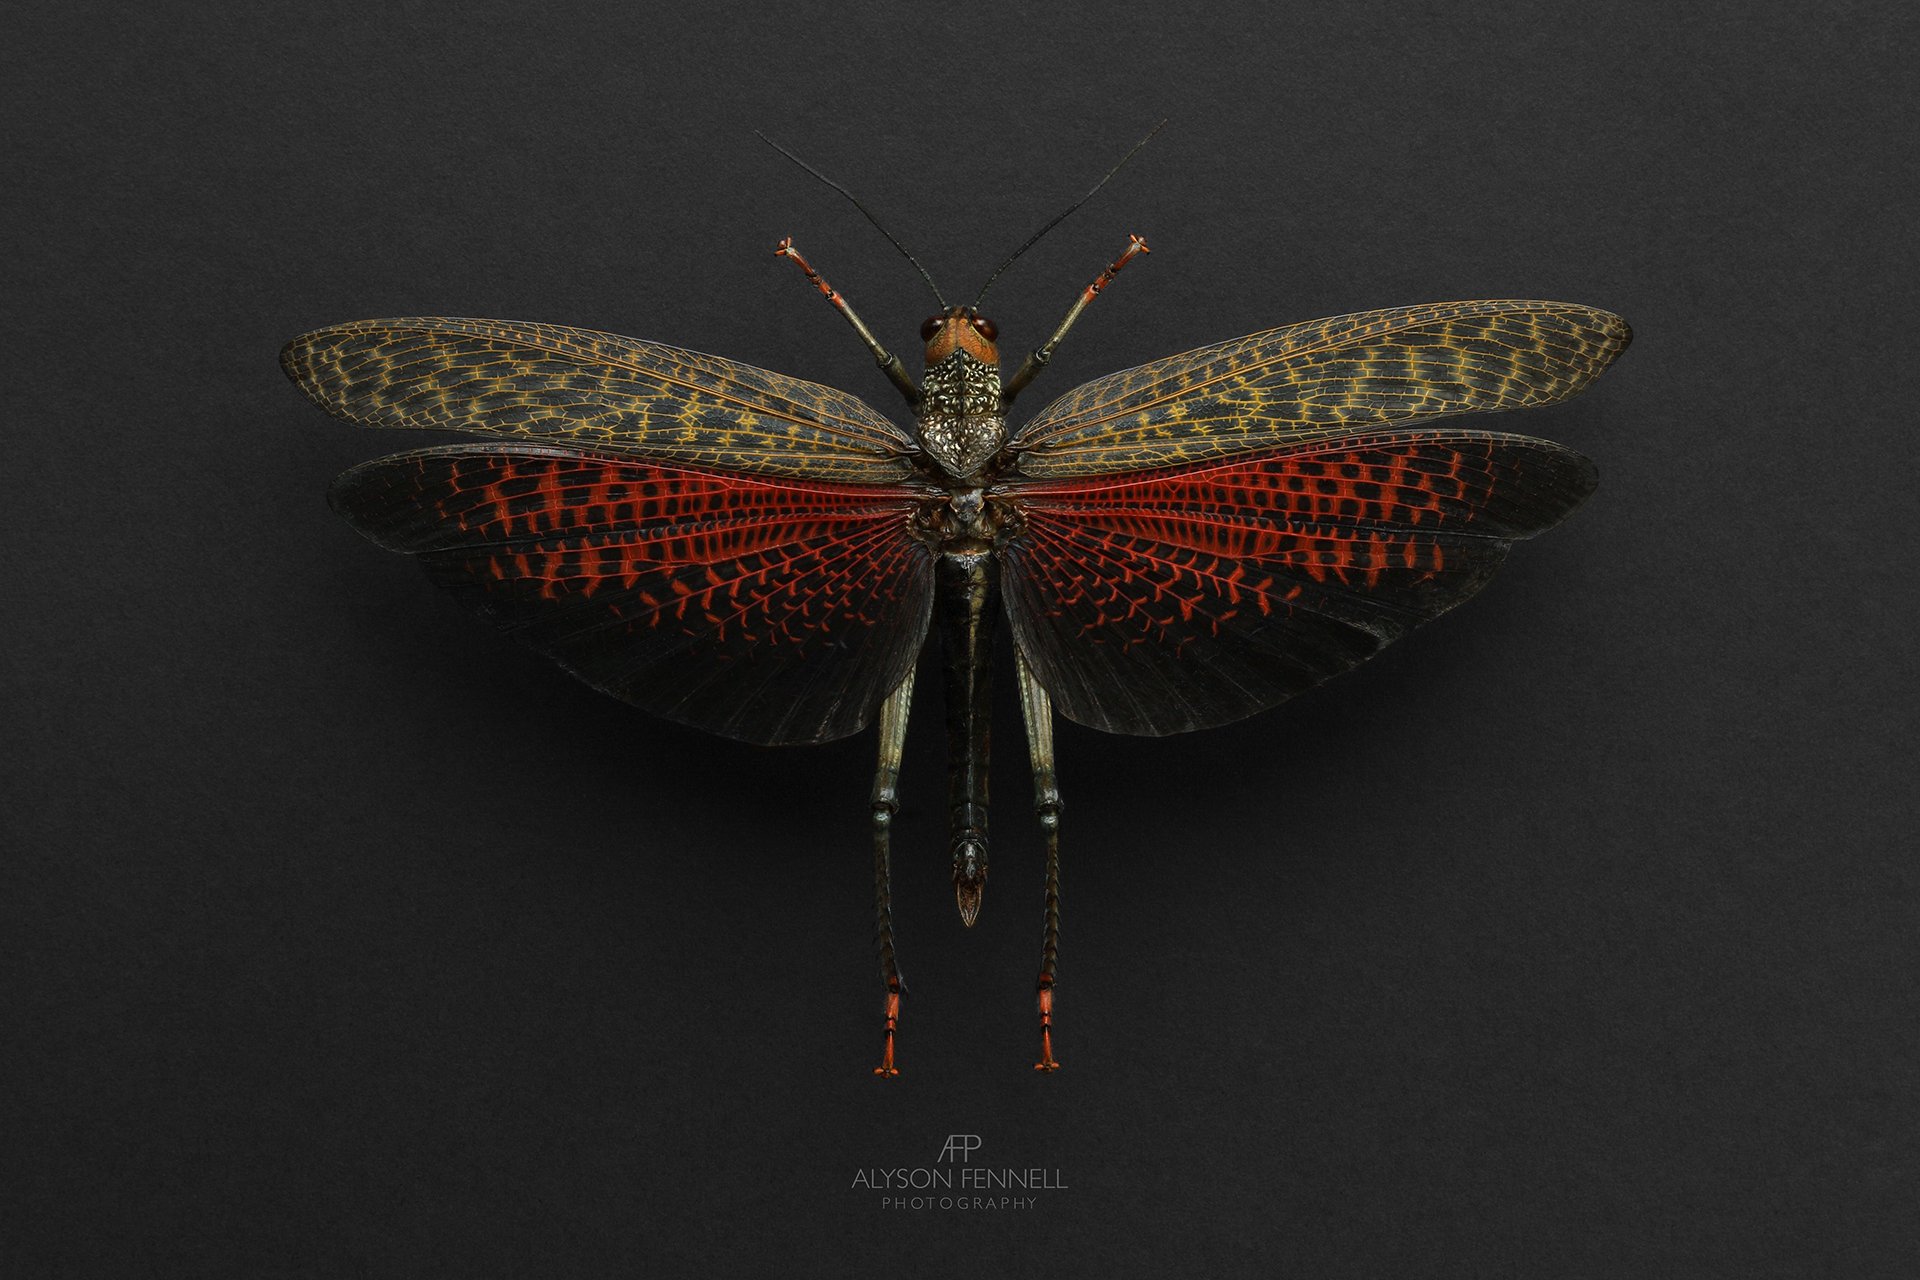 Giant Flame-Winged Grasshopper